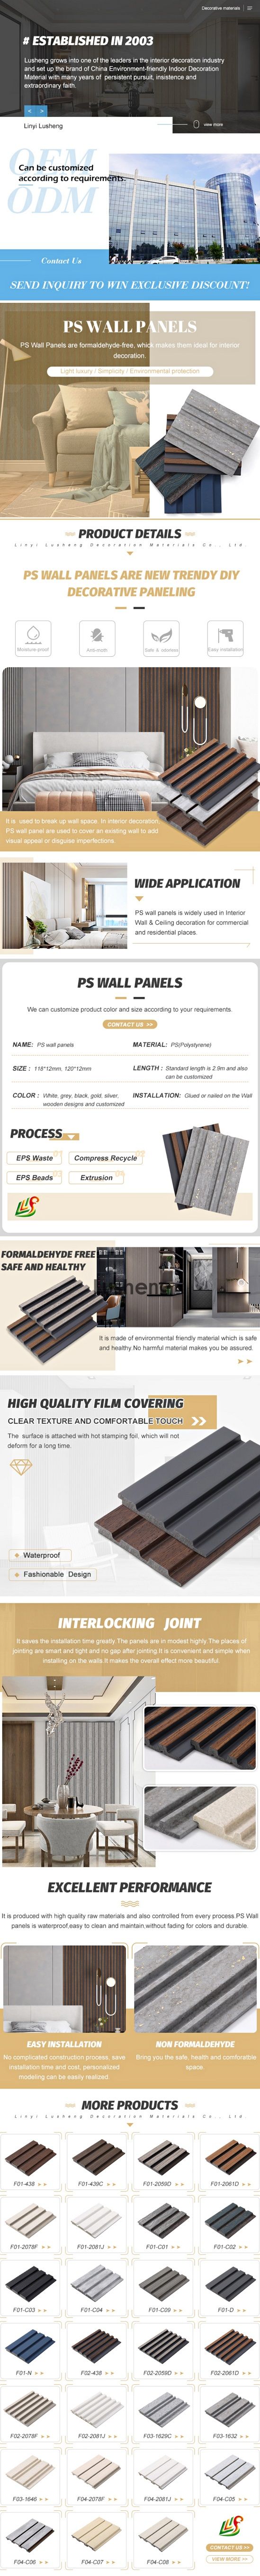 New arrival fashional PS wall panel for interior walls decor(图2)